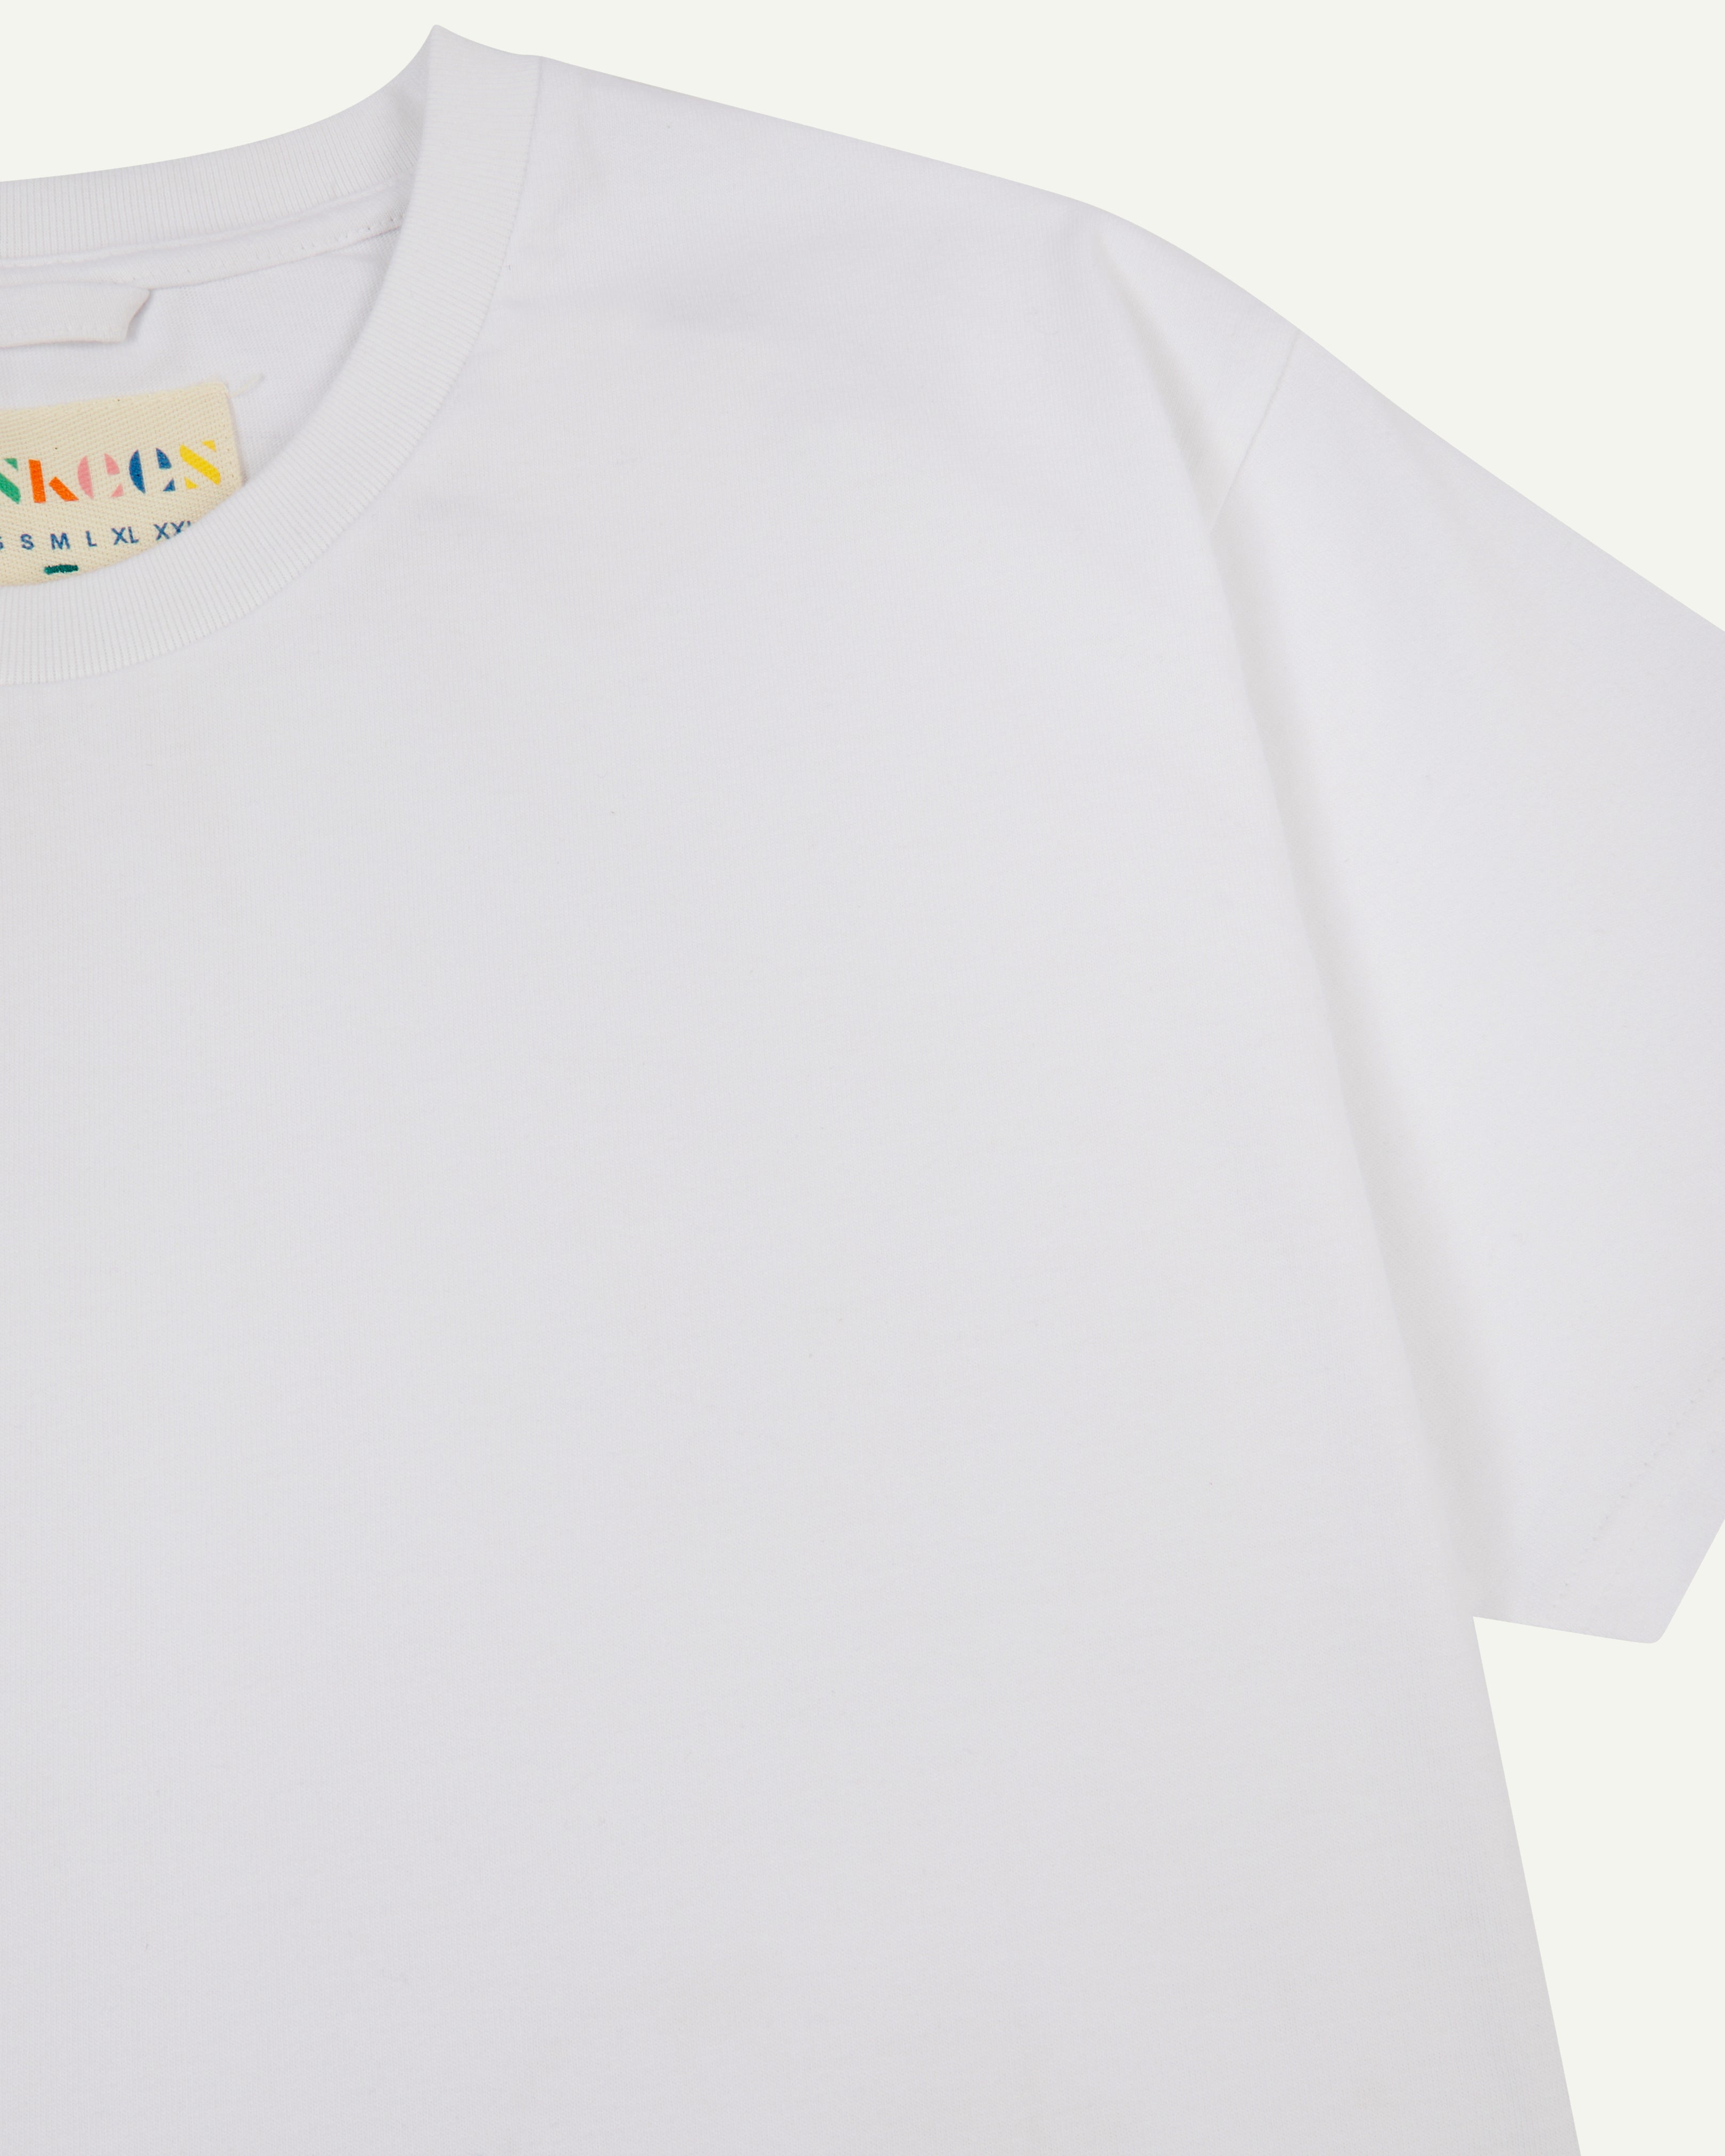 front view of uskees #7006 men's short sleeve T-shirt  in white showing part of uskees neck label.